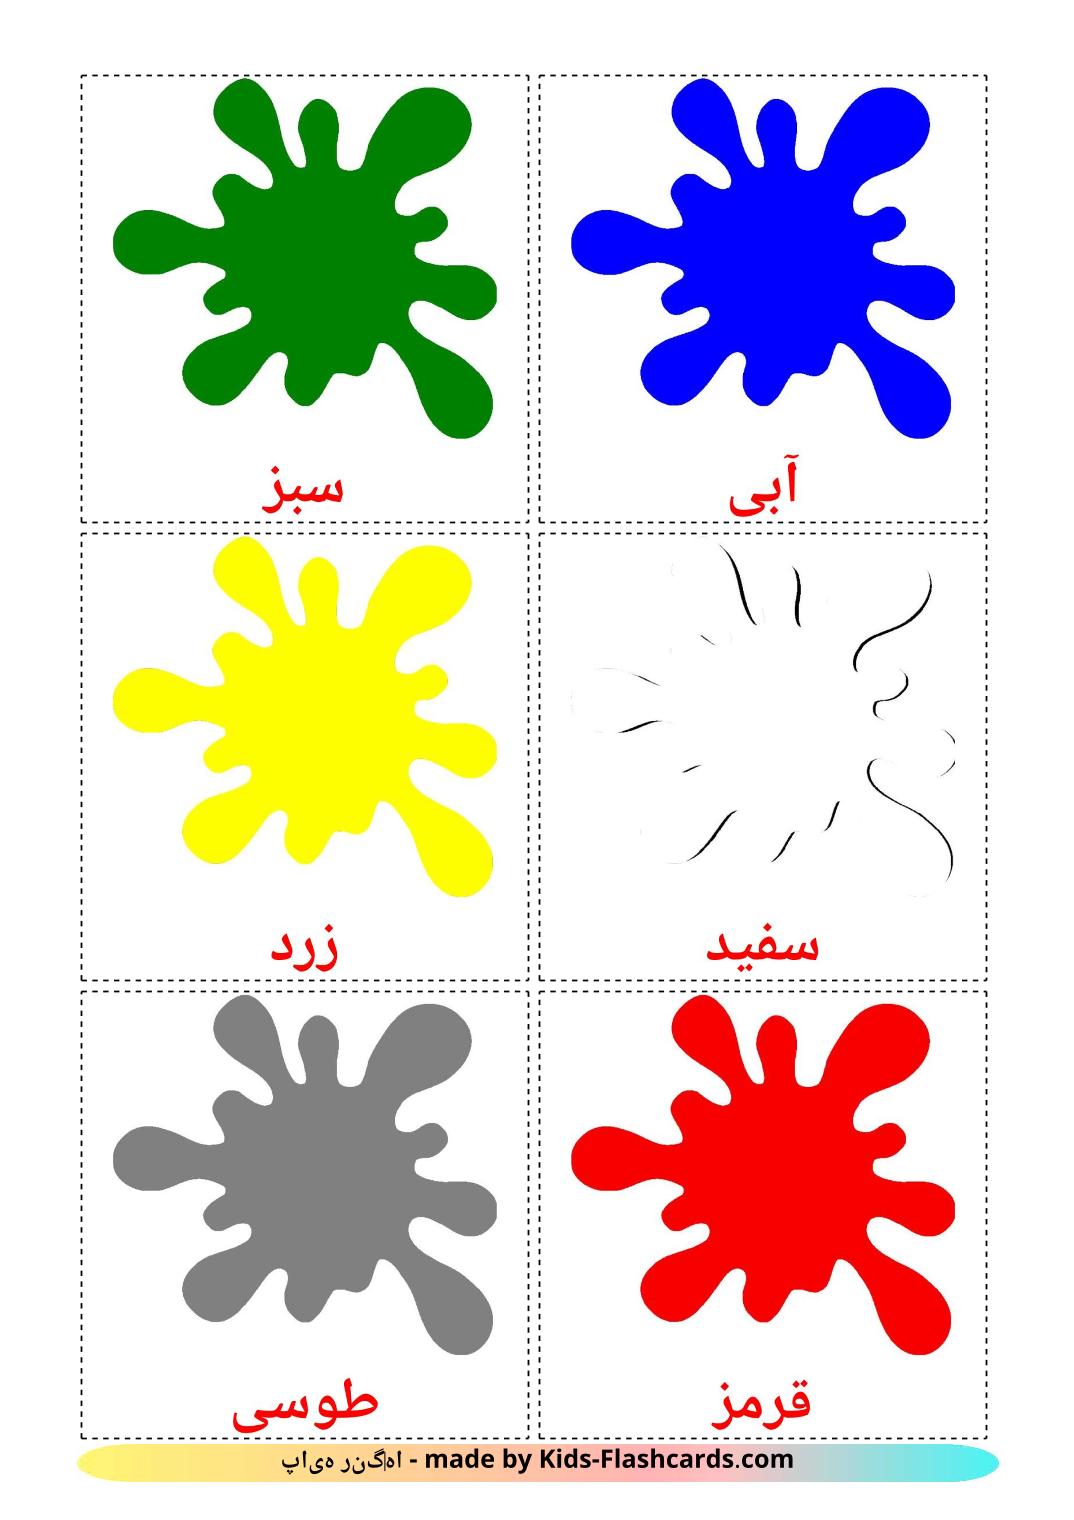 Base colors - 12 Free Printable persian Flashcards 